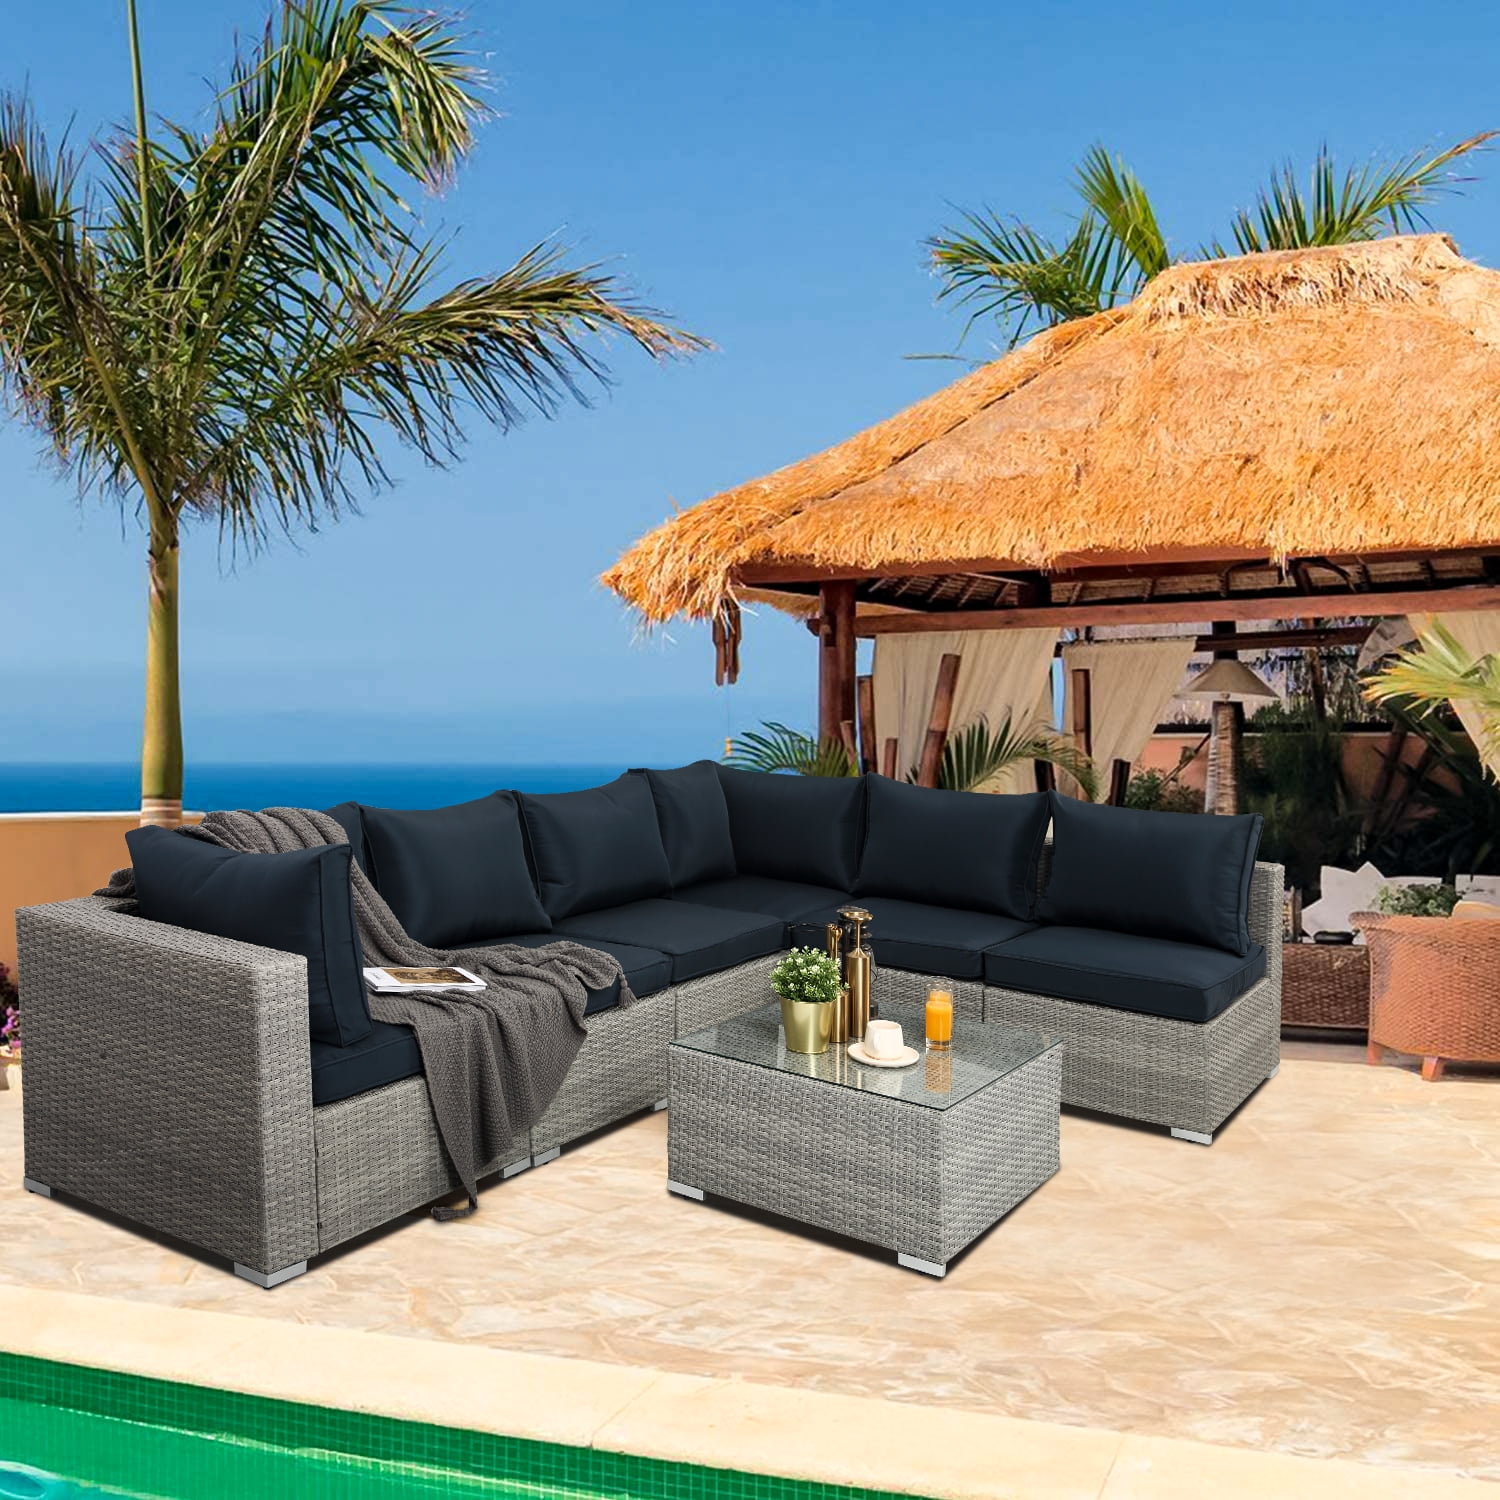 SEGMART Wicker Patio Furniture Sets, Newest 7PCS Outdoor Wicker Patio Sectional Sofa w/12 Padded Cushions, Coffee Table Table, 2 Pillows, Conversation Sets for Porch Backyard Garden, SS633